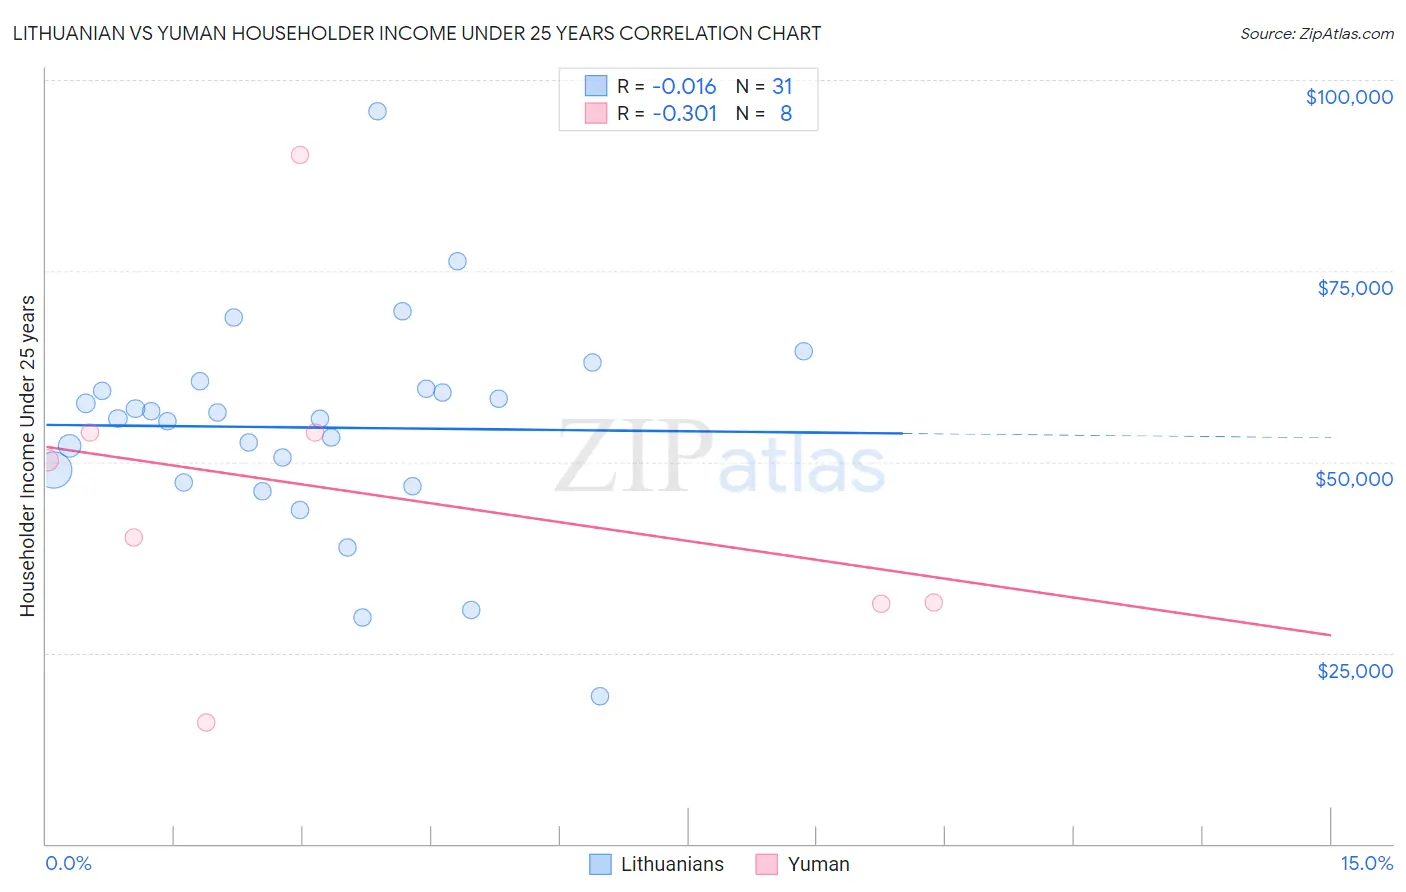 Lithuanian vs Yuman Householder Income Under 25 years